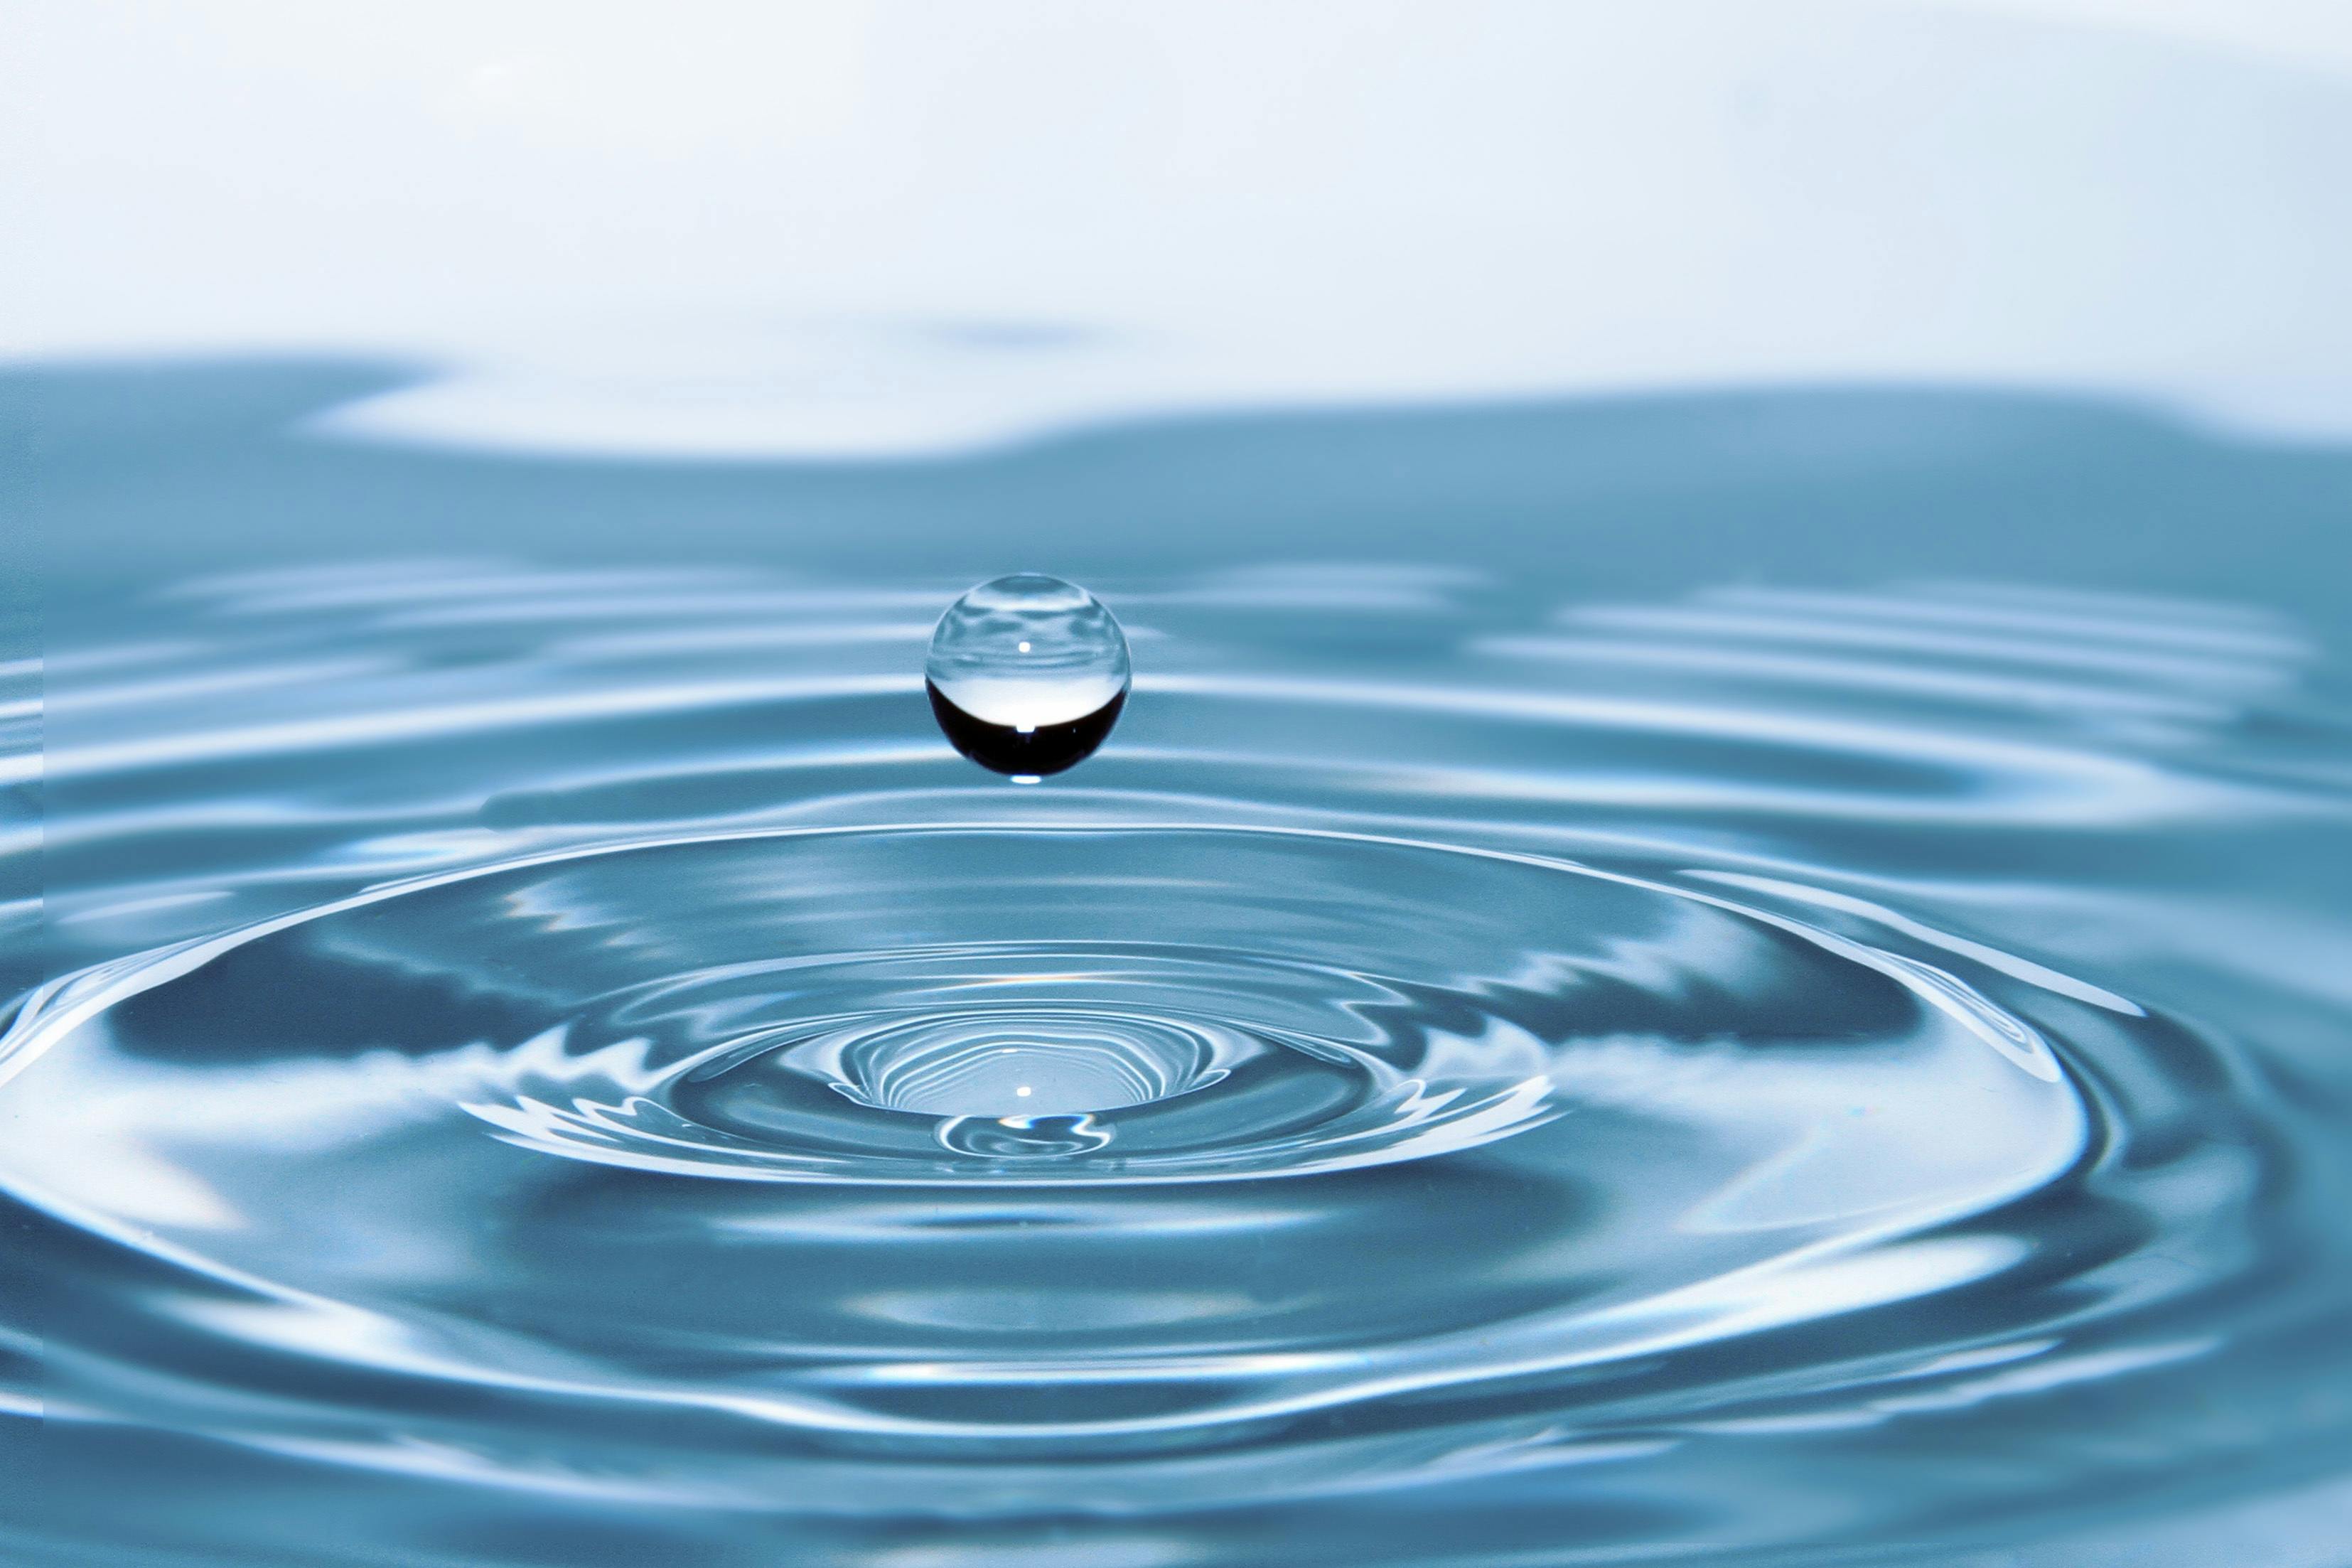 Drops Of Water Photos Download The BEST Free Drops Of Water Stock Photos   HD Images